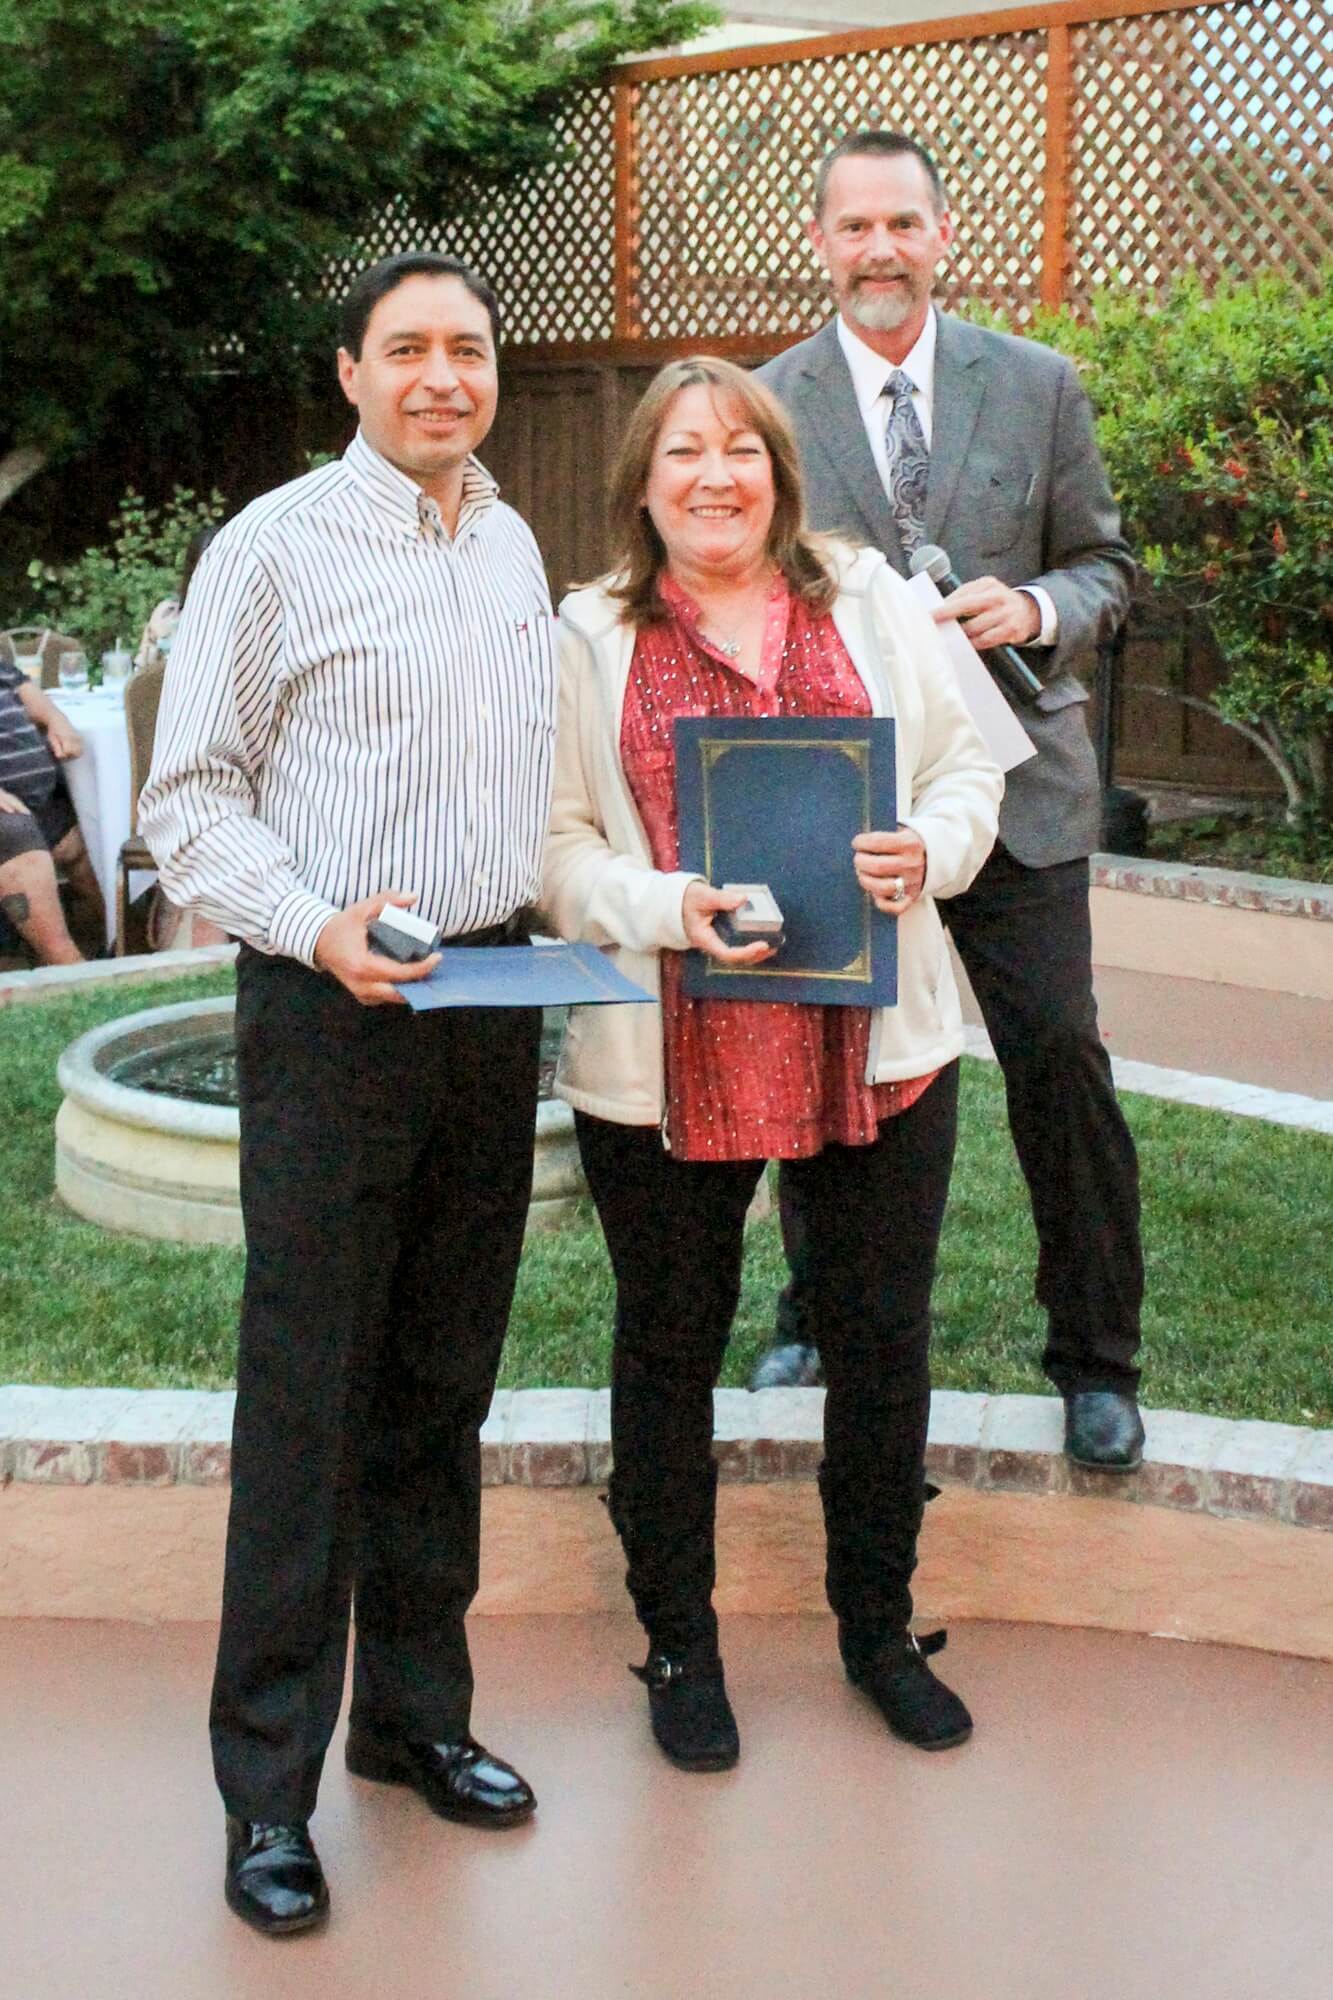 Dr. Kevin Flanigan presented 15-year pins of service to Oscar Morales and Linda Little.